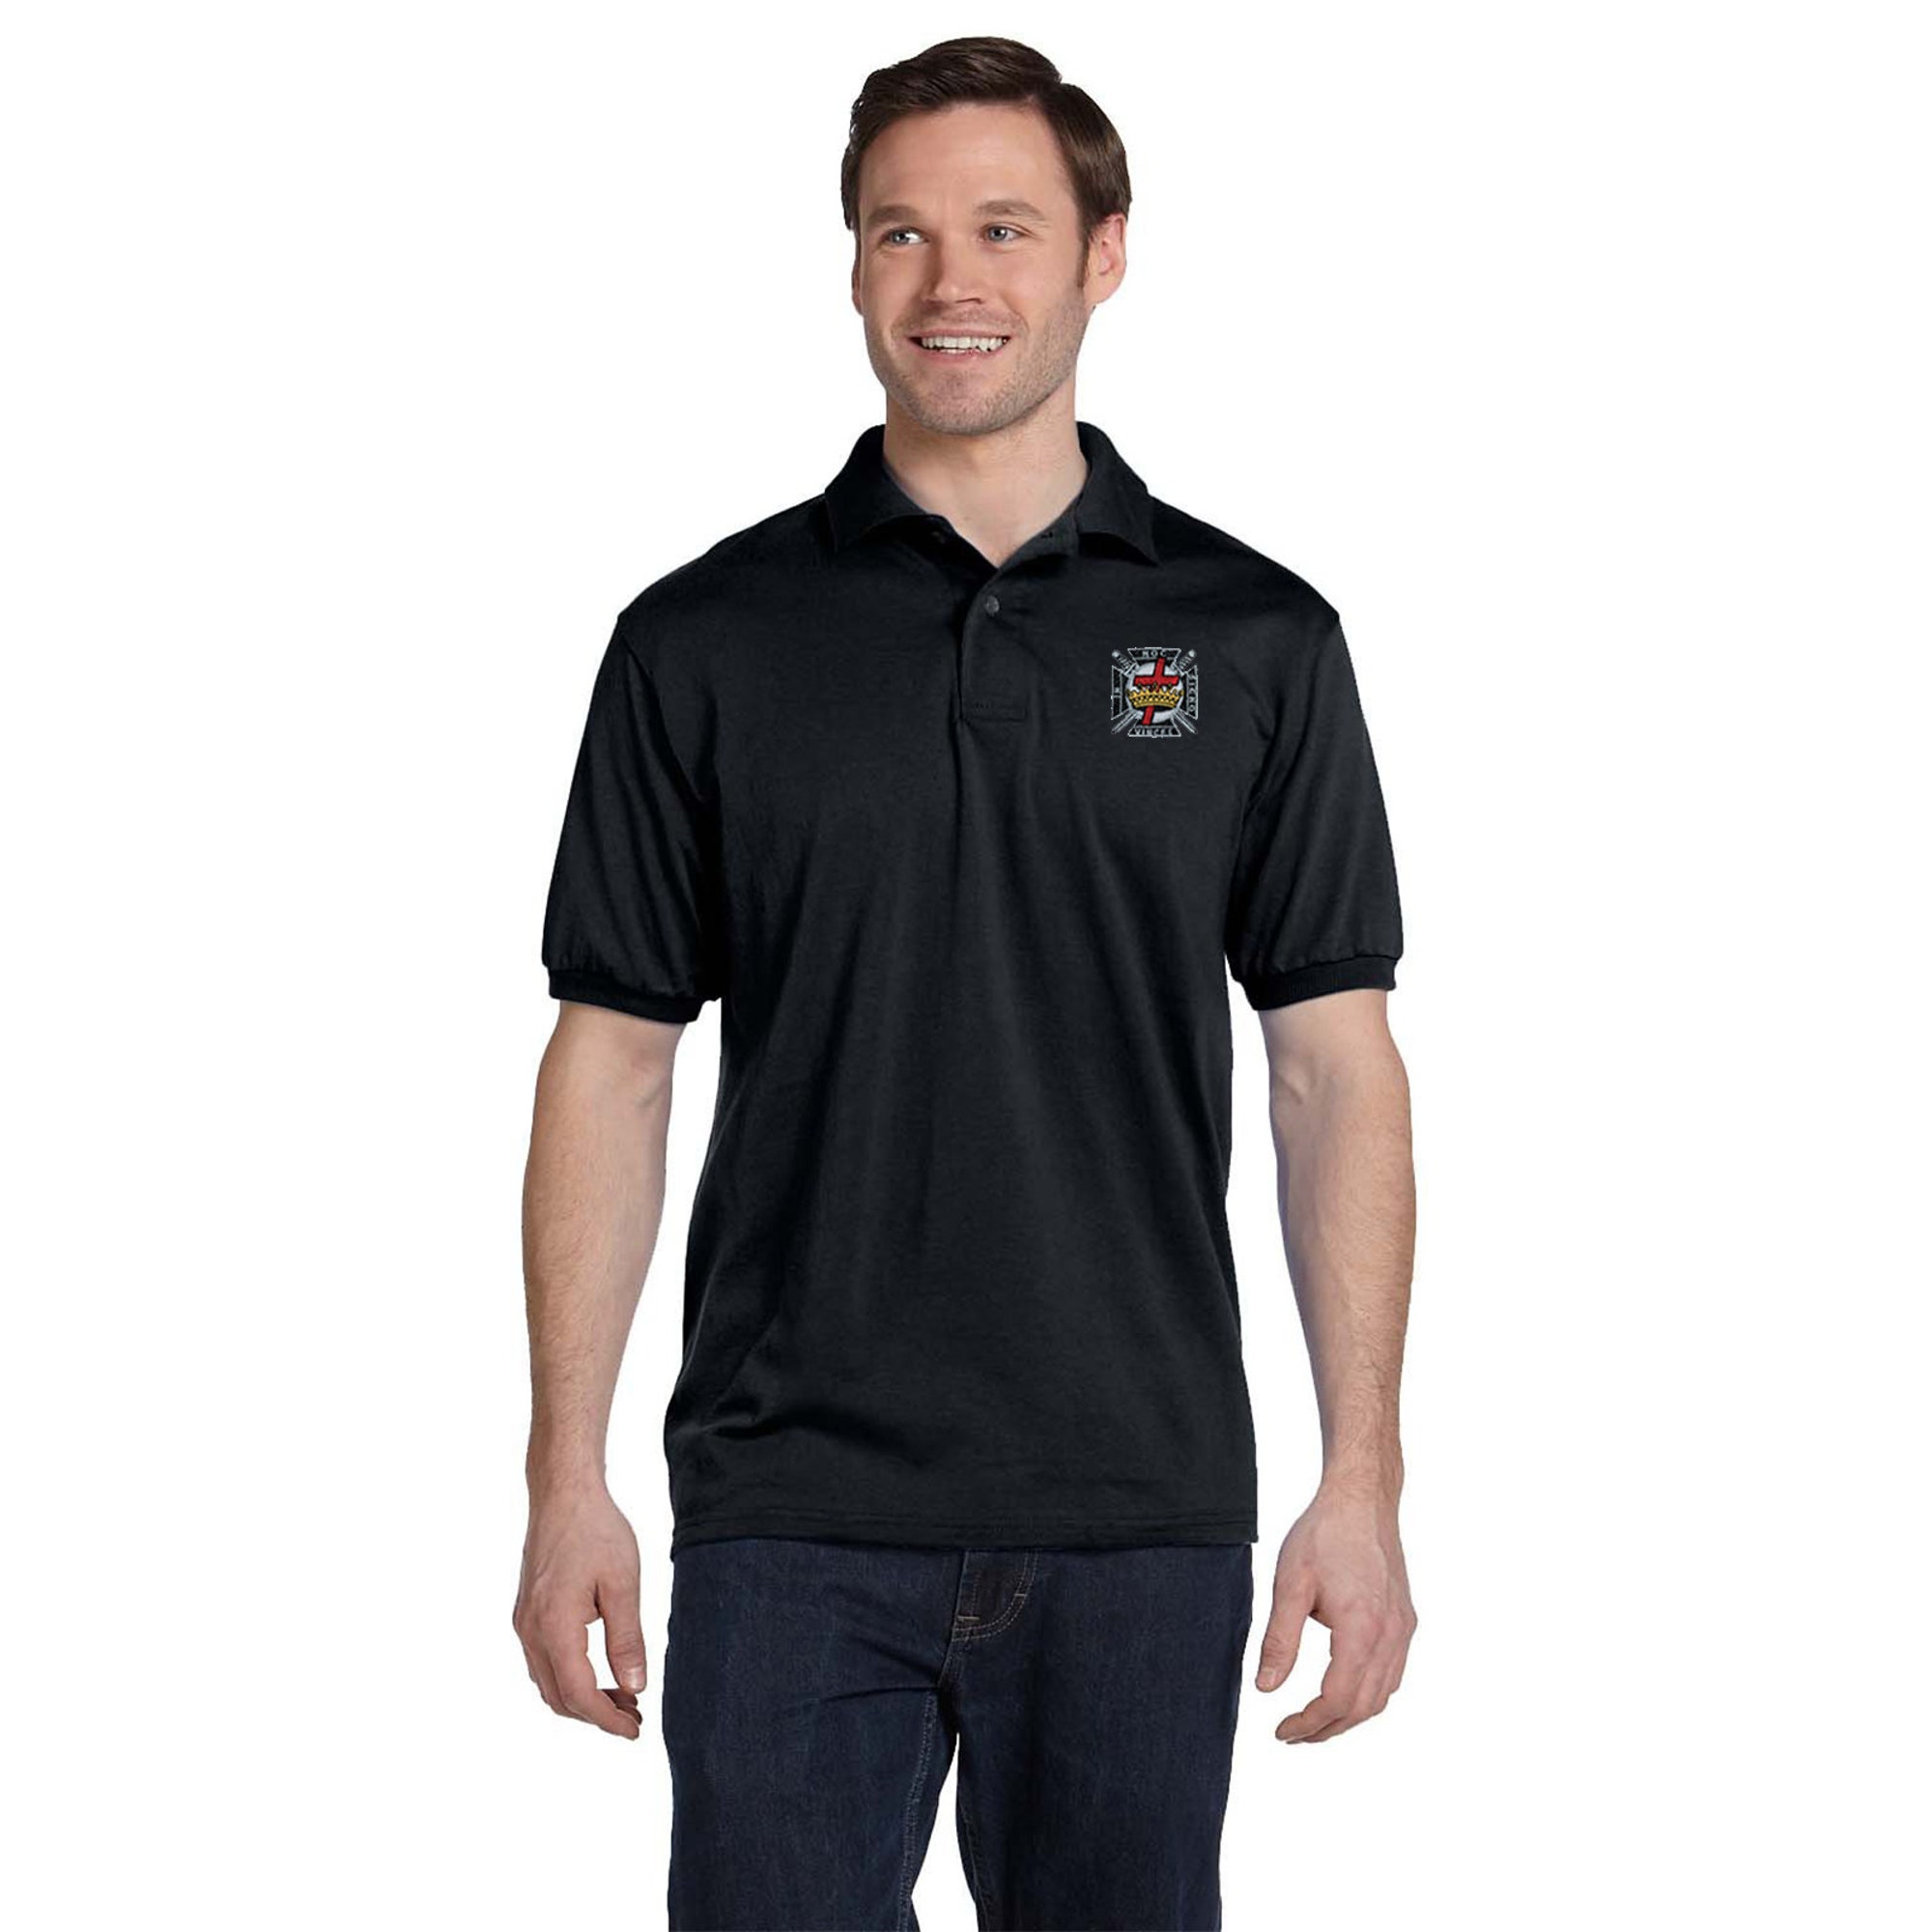 Knights Templar Embroidered Men's Polo Shirt